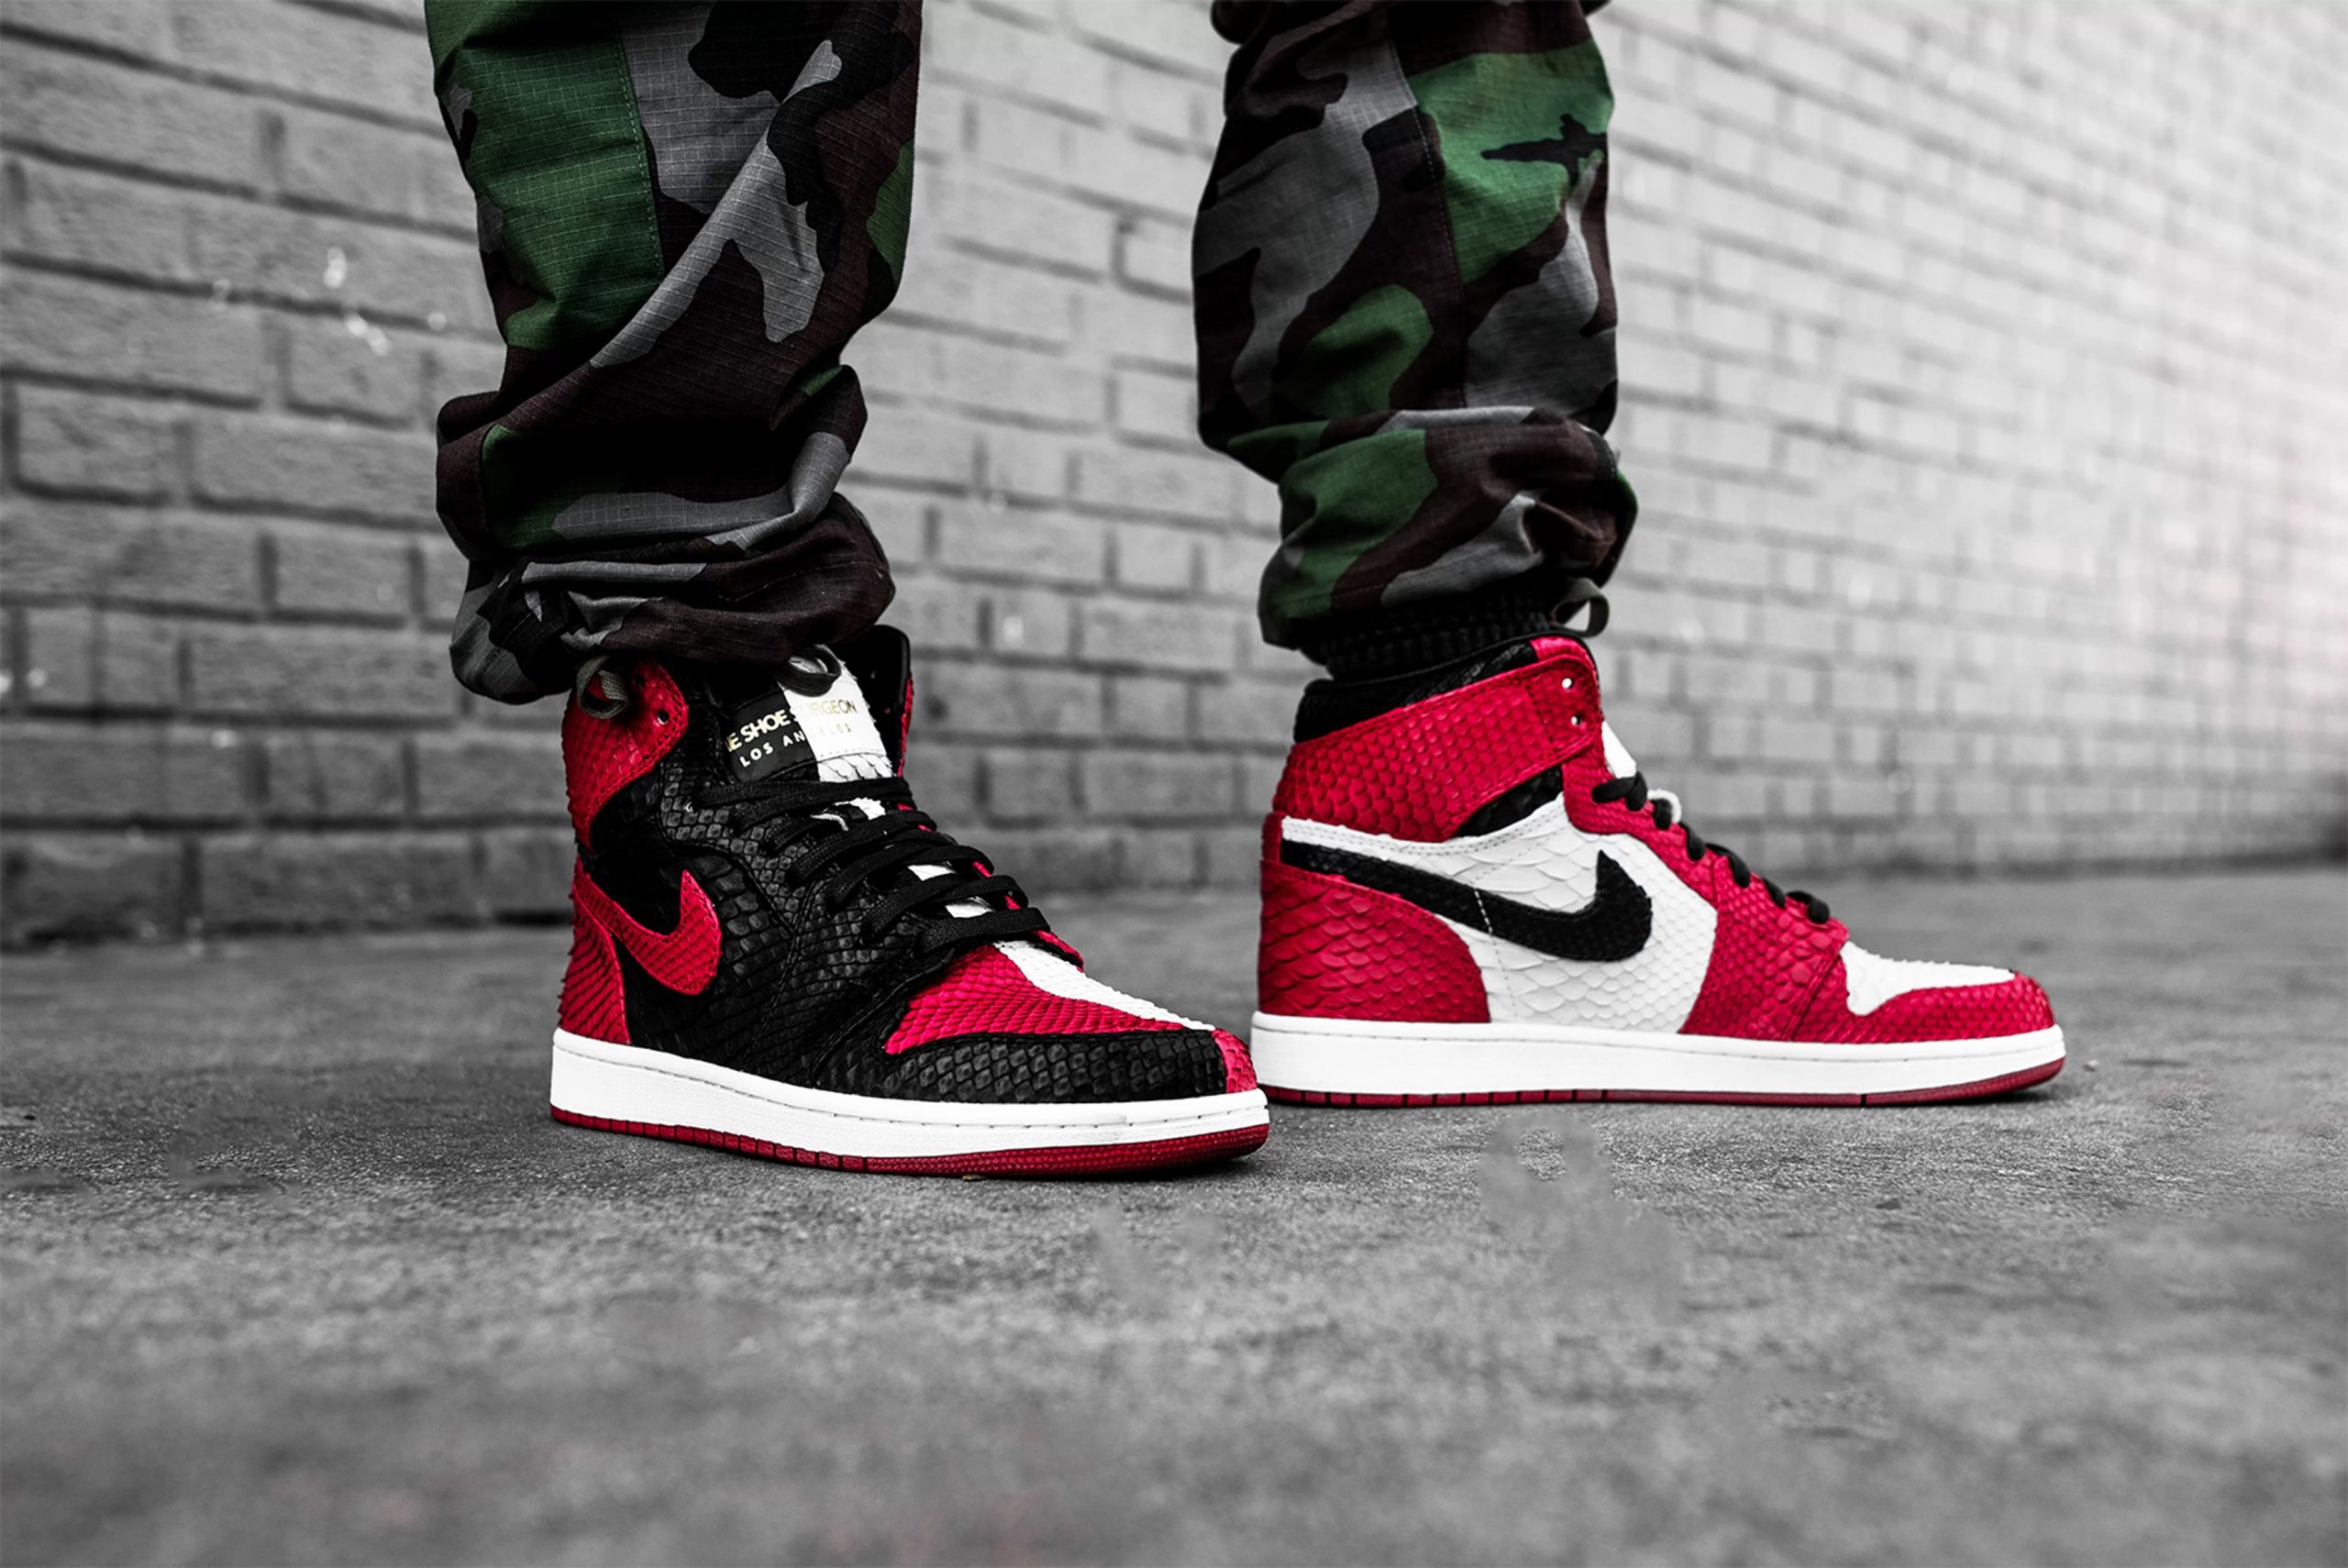 Air Jordan 1 "Homage To Home" has become more poisonous and more poisonous